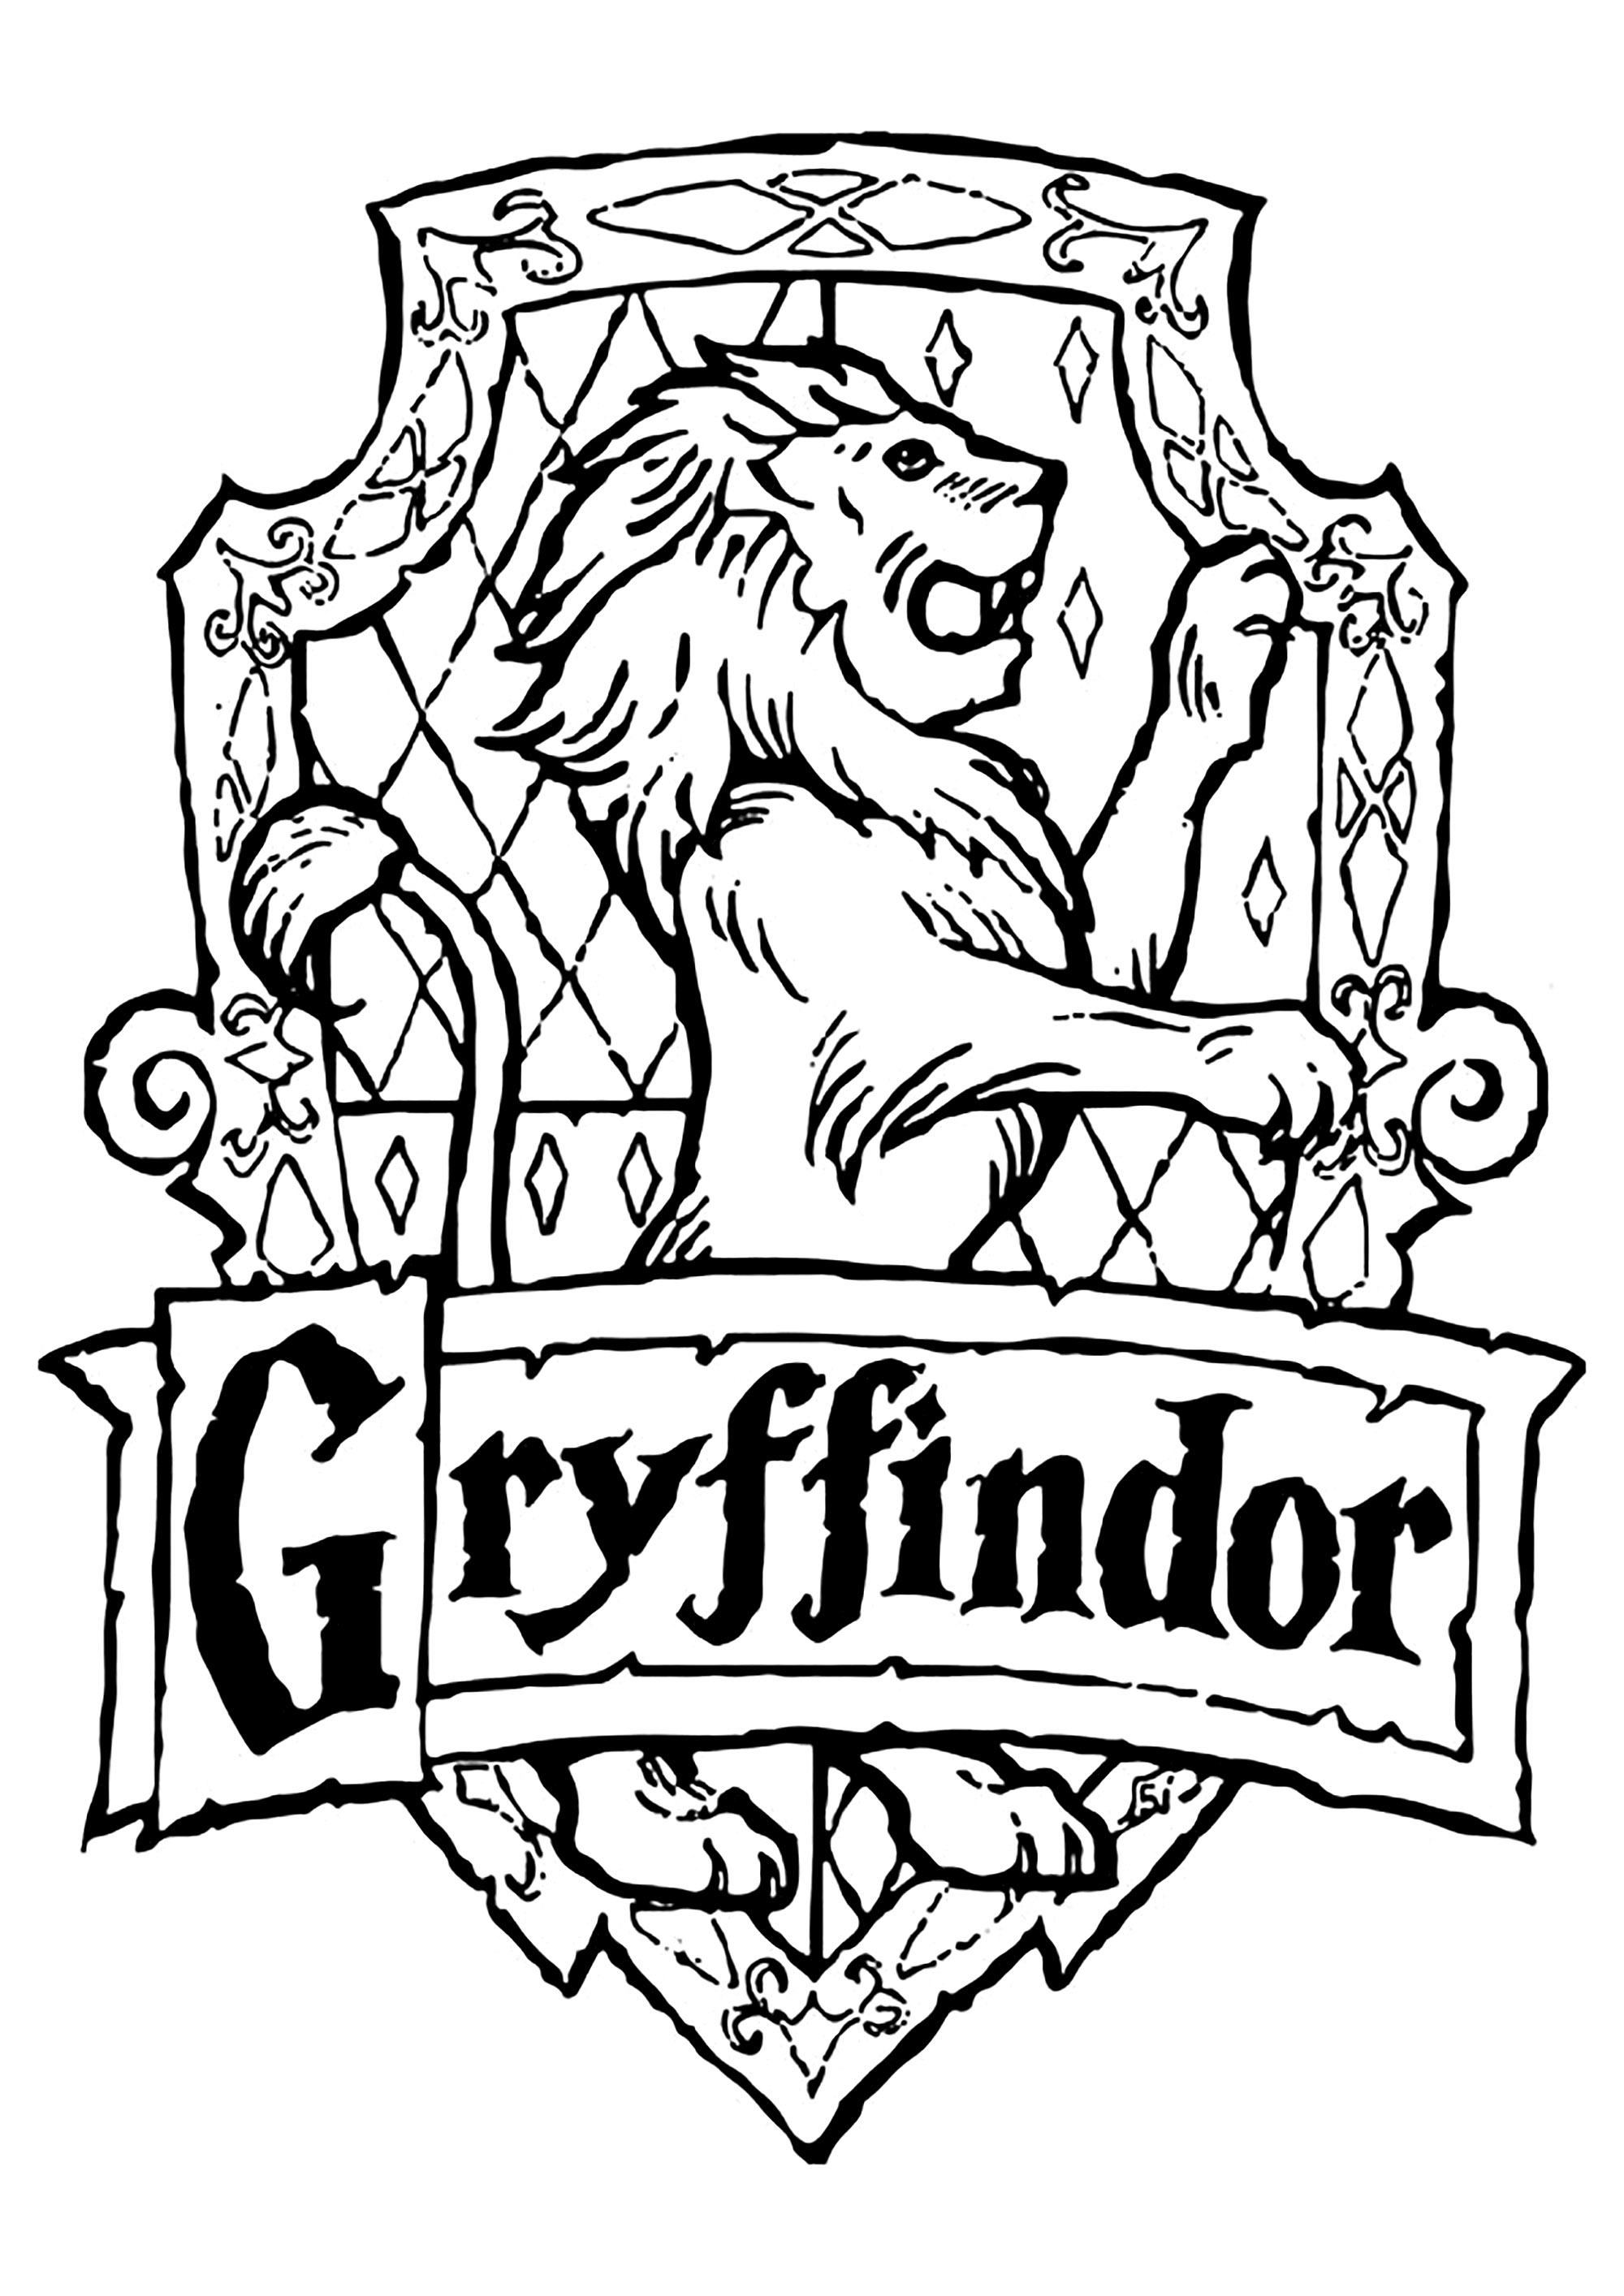 Harry Potter coloring page to download